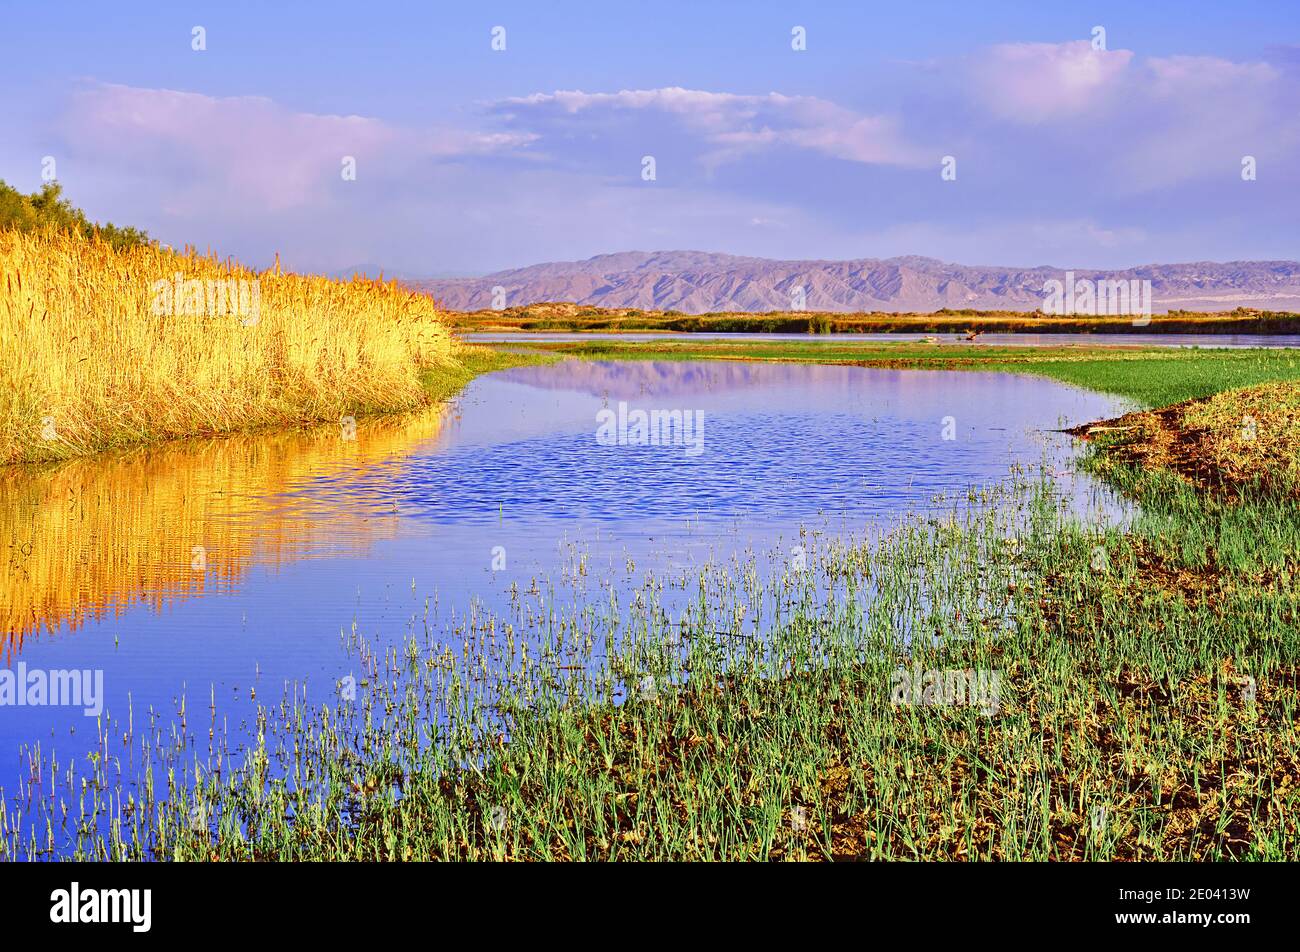 Quiet backwater near the river with a reflection of golden reeds and ripples on the water Stock Photo